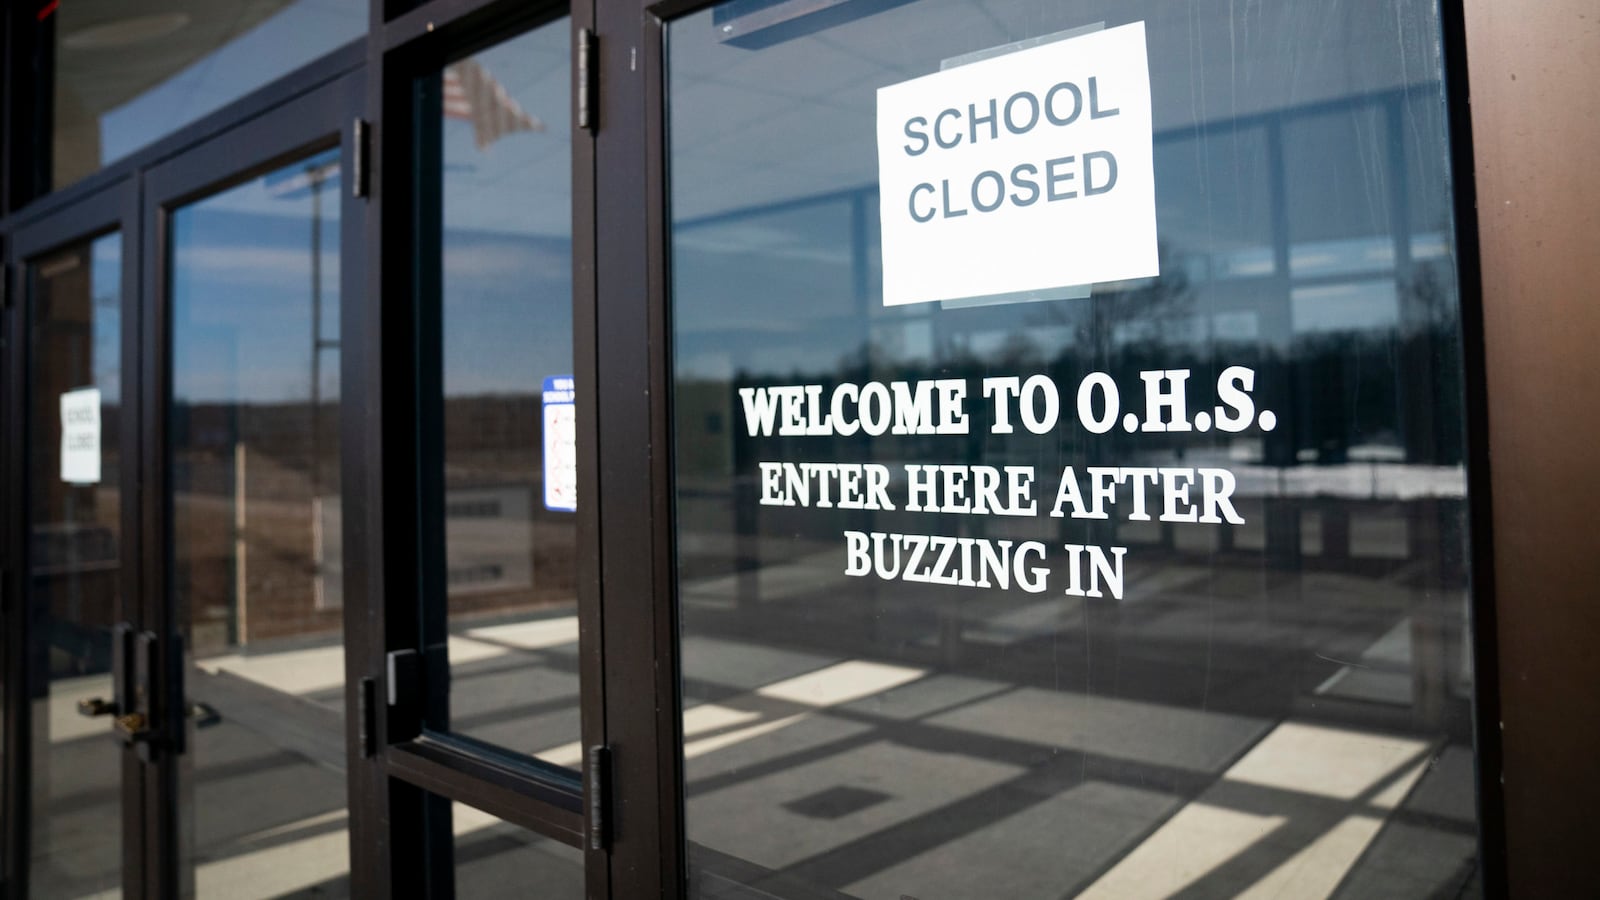 OSCEOLA, MN - MARCH 10: Osceola High School was closed in Osceola, Wis., on Tuesday March 10, 2020, after it was discovered someone testing positive for the coronavirus attended a function Saturday at the school. The school was closed for cleaning. (Photo by Renee Jones Schneider/Star Tribune via Getty Images)